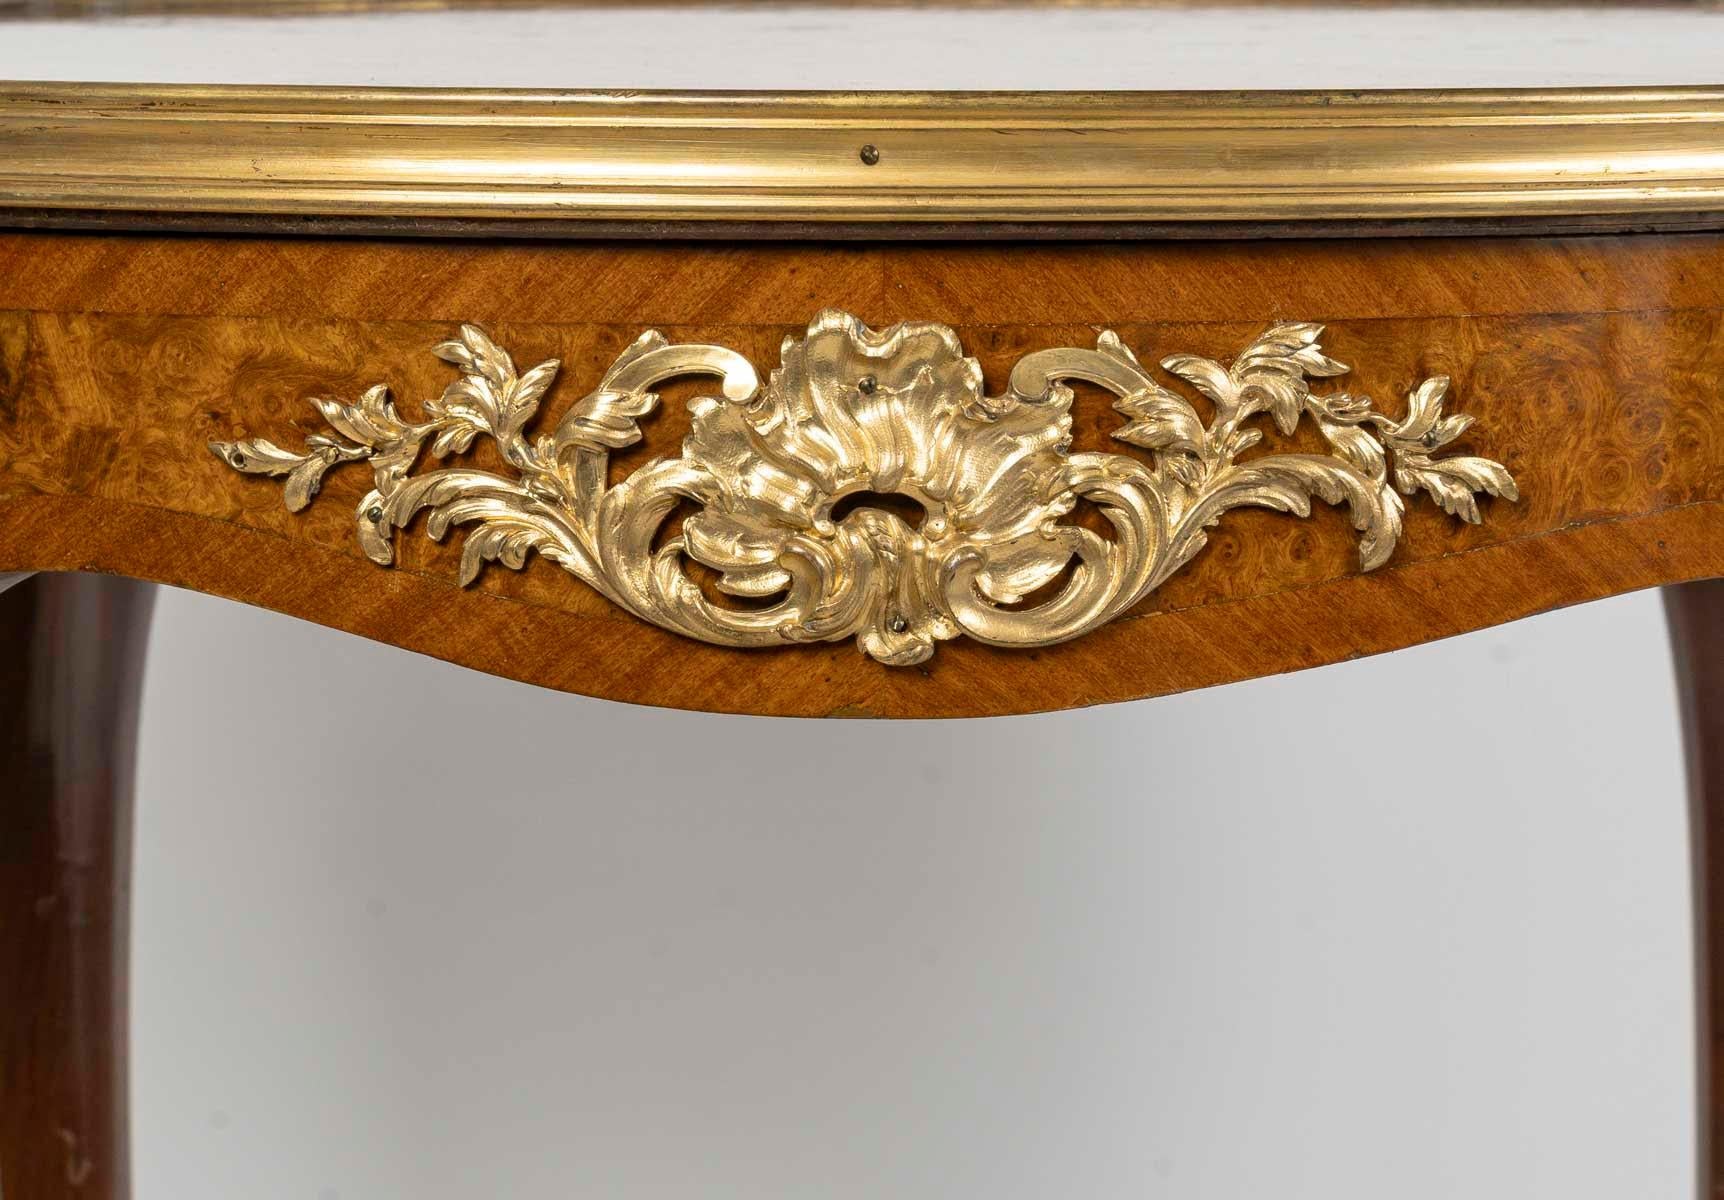 Louis XV style pedestal table in marquetry and gilt bronzes, 19th century.

Louis XV style pedestal table, Napoleon III period, inlaid wood and gilt bronzes, 19th century.
H: 76cm, D: 70cm